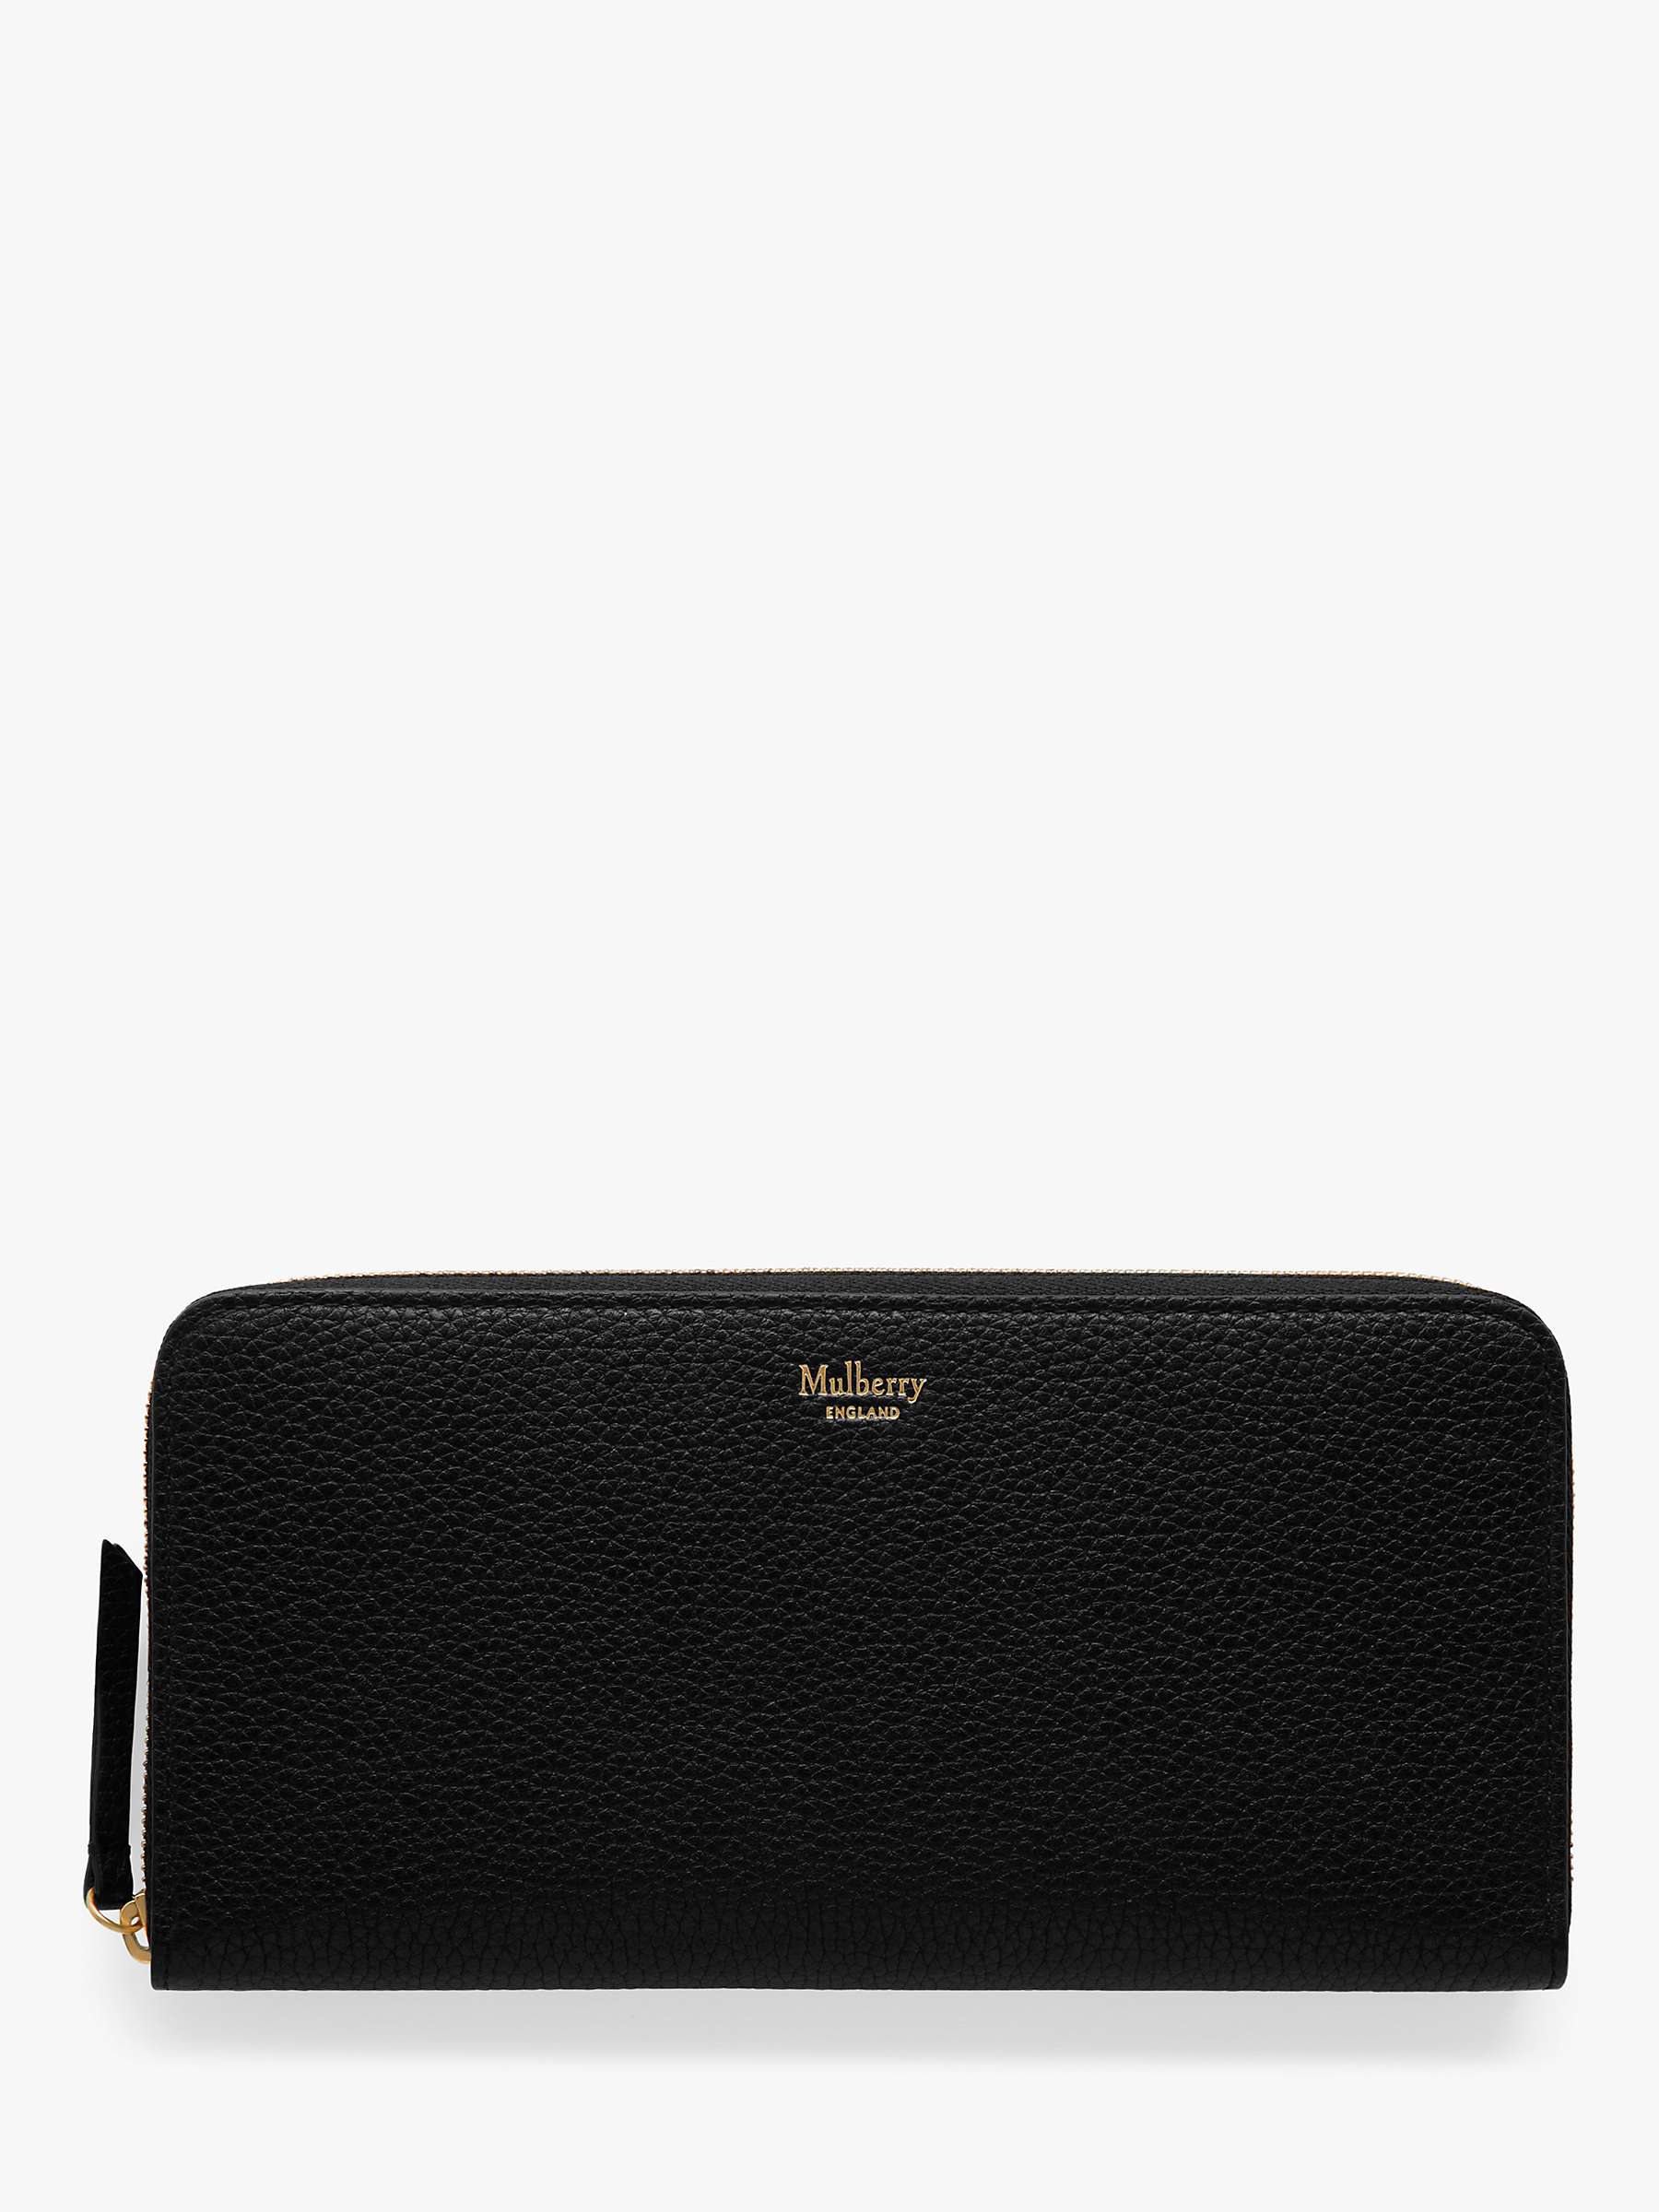 Buy Mulberry Small Classic Grain Leather 8 Card Zip Around Wallet Online at johnlewis.com